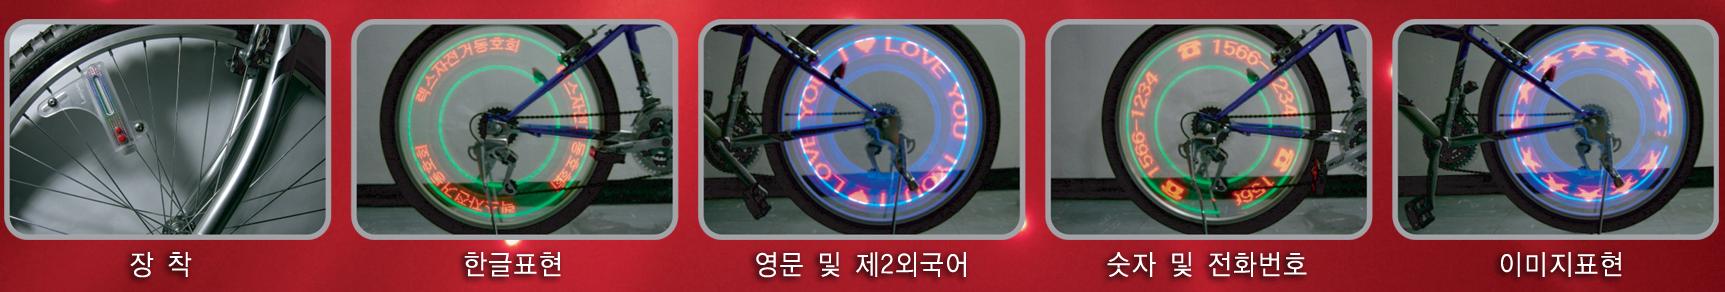 Bicycle LED Light - Lex  Made in Korea